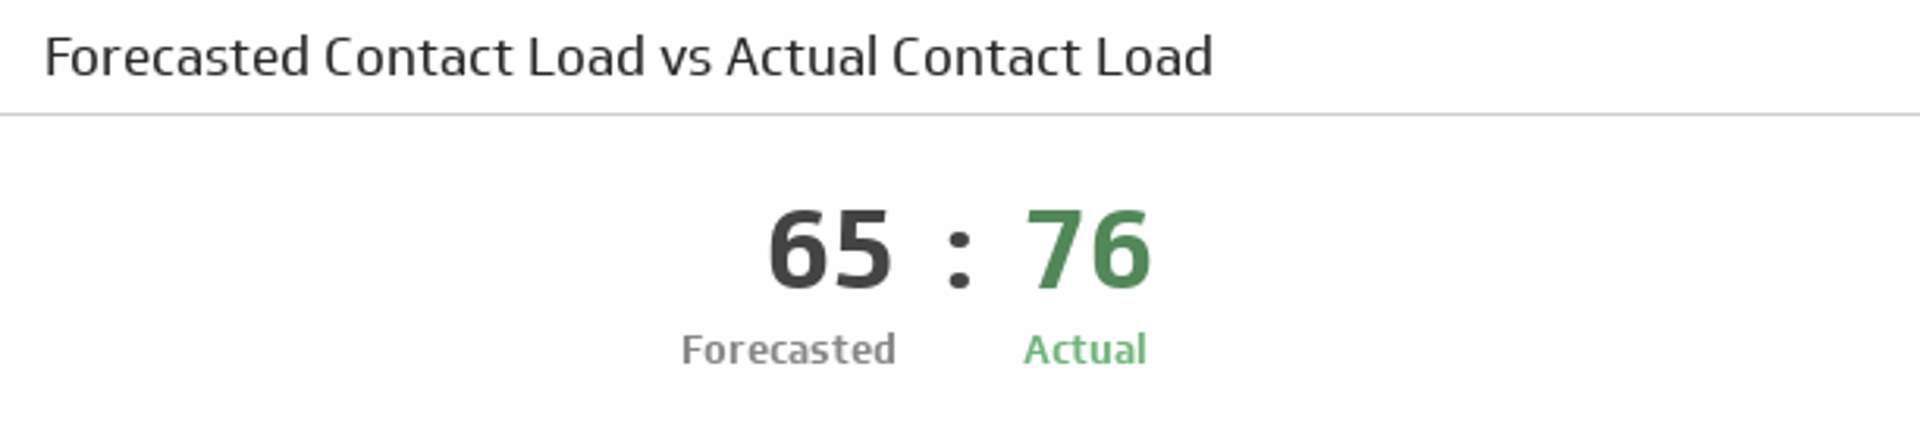 Call Center KPI Example - Forecasted Contact Load to Actual Contact Load Metric